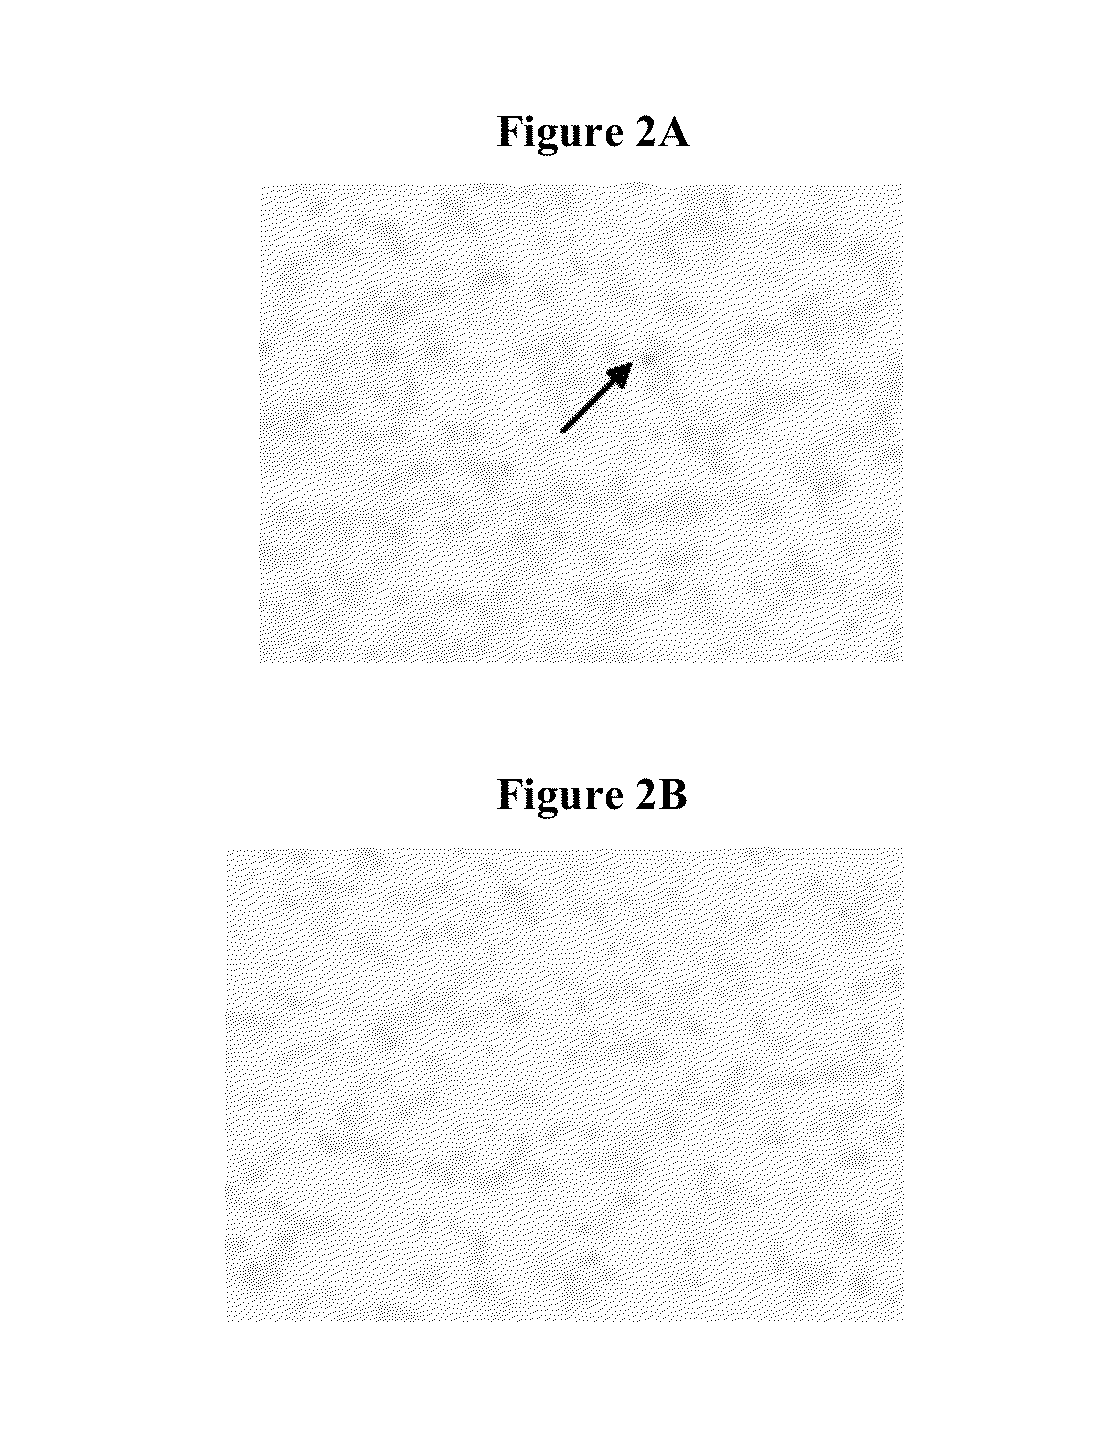 Methods for inhibiting the binding of endosialin to ligands